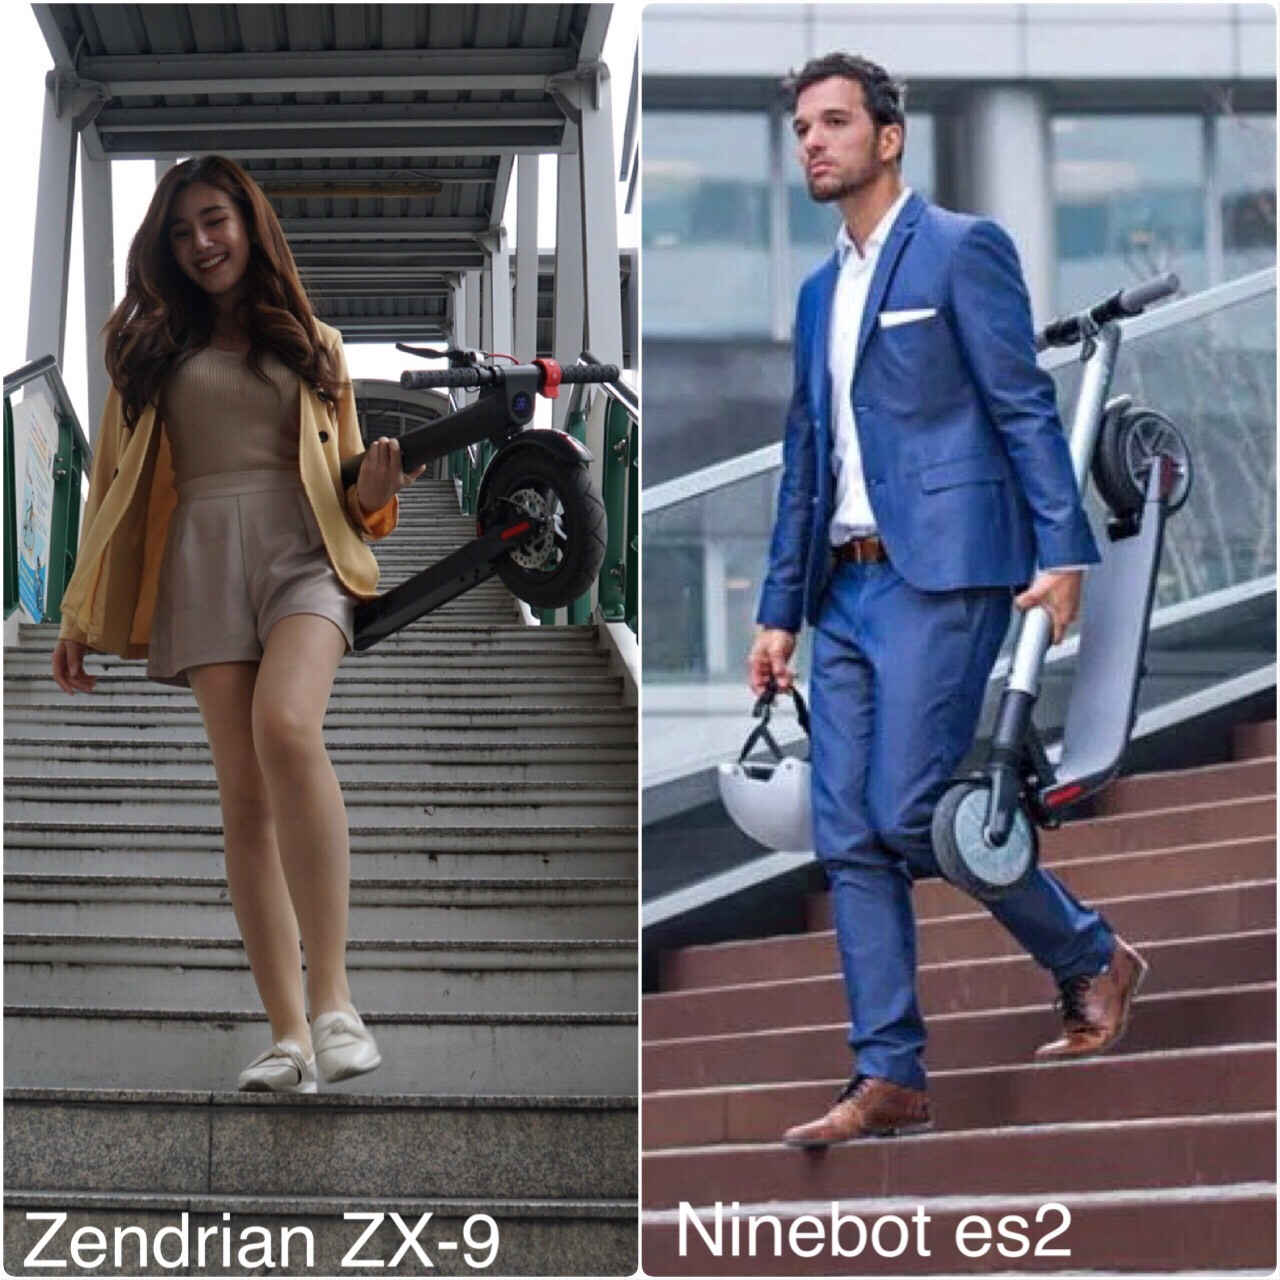 Girl carries Zendrian ZX-9 down BTS stairs, man carries Ninebot ES2 down stairs